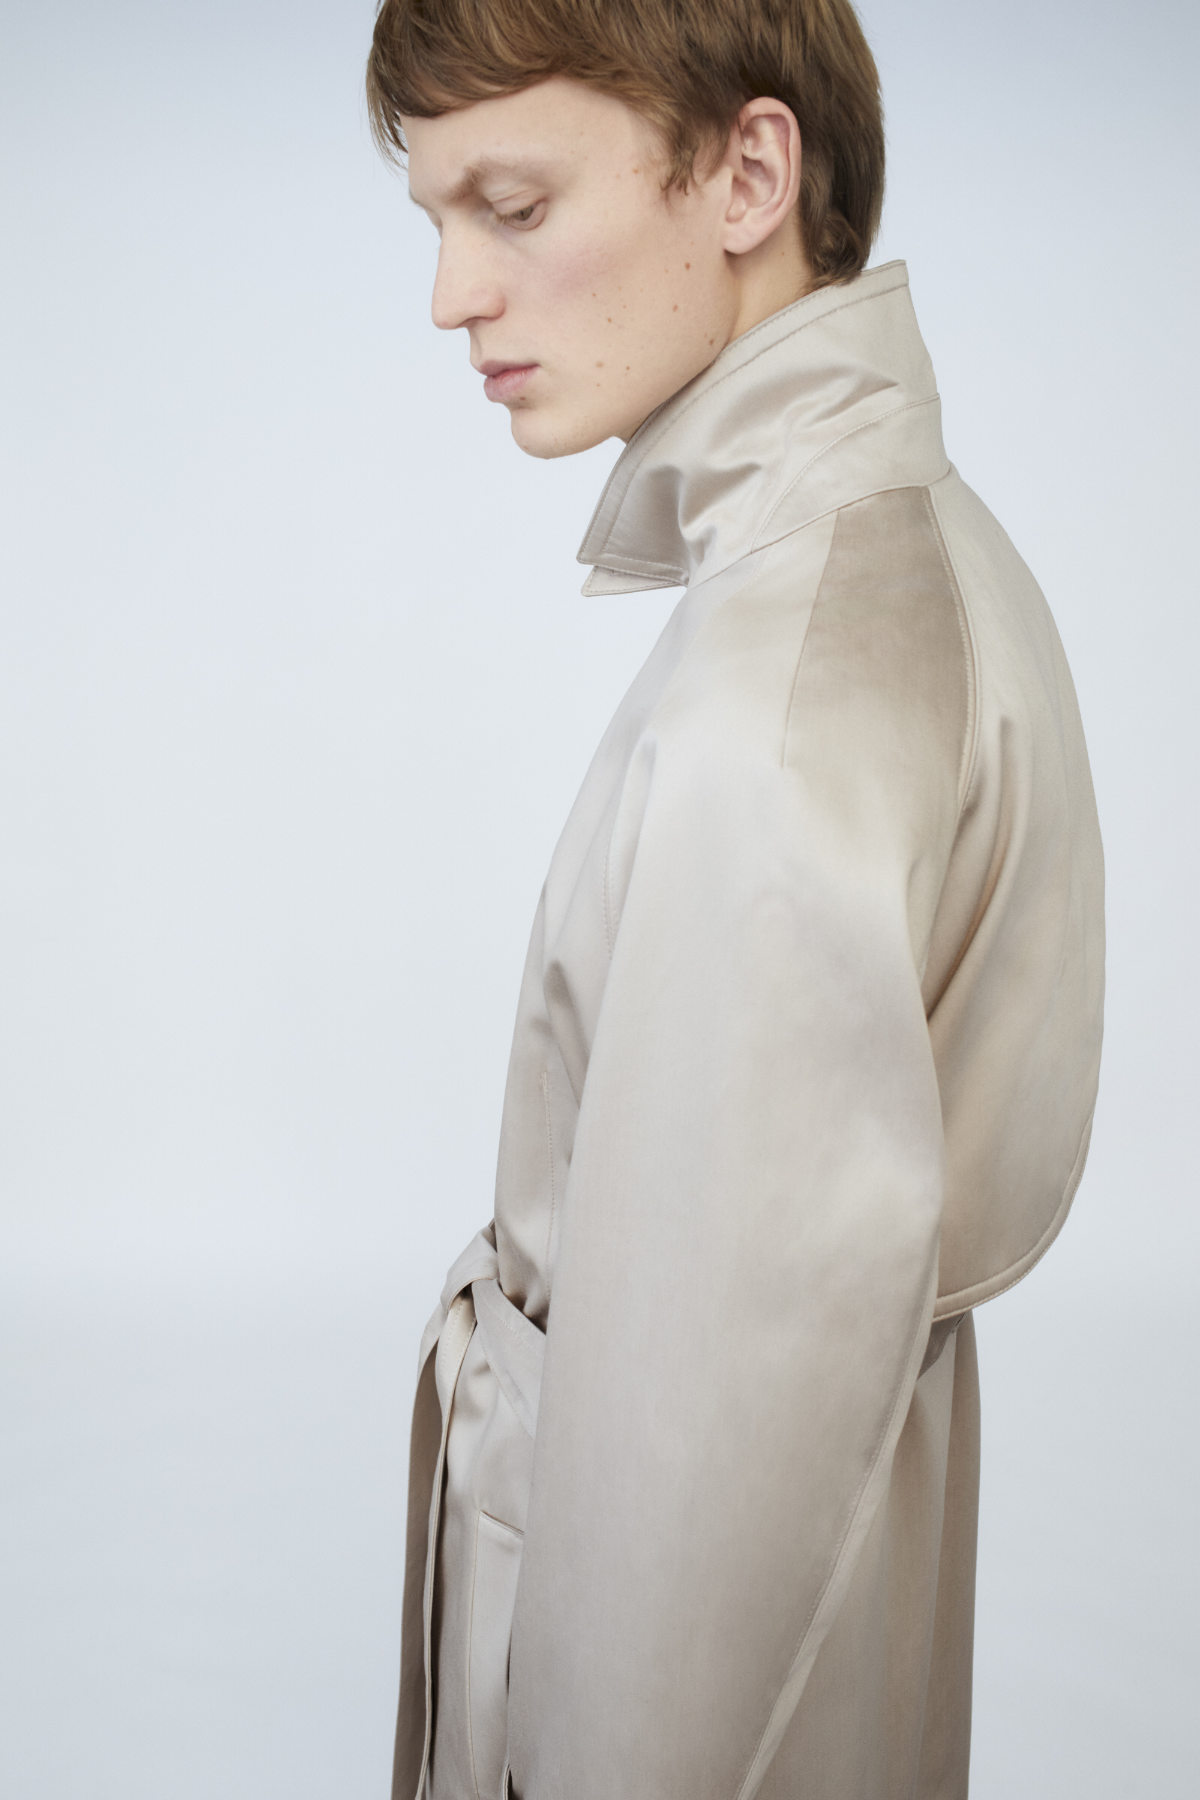 COS Spring Summer 2021 Collection